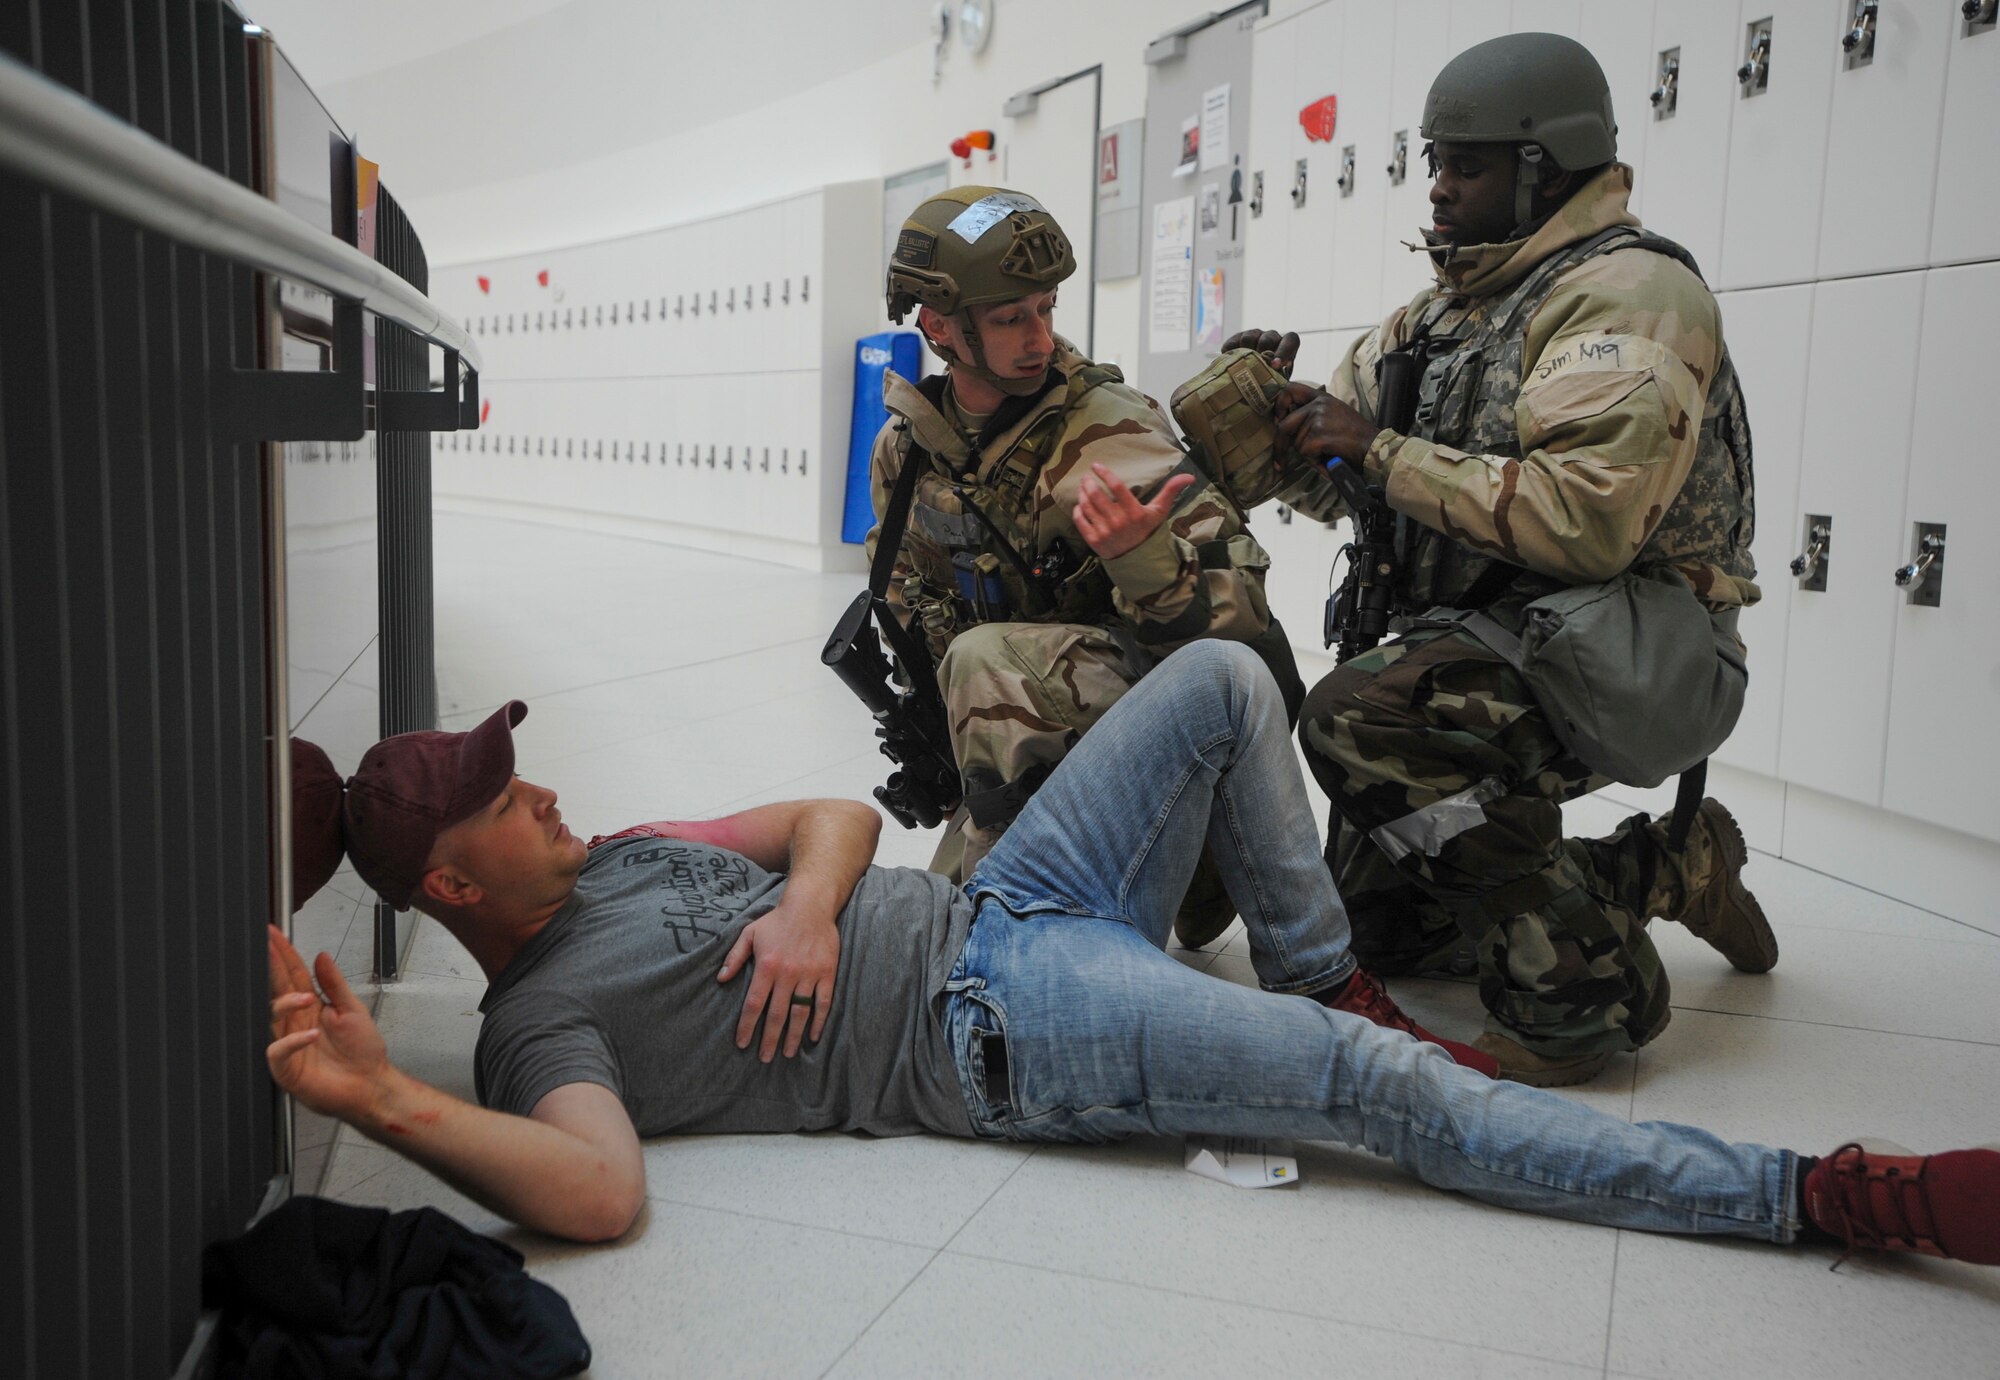 U.S. Airmen assigned to the 569th U.S. Forces Police Squadron help simulated victims of an active shooter exercise at Kaiserslautern High School at Vogelweh Military Complex, Germany, Sept. 26, 2019. The event happened as part of Operation Varsity 19-03. It also marked the first time the defenders were allowed to practice responding to an incident at the new school. (U.S. Air Force photo by Tech. Sgt. Timothy Moore)